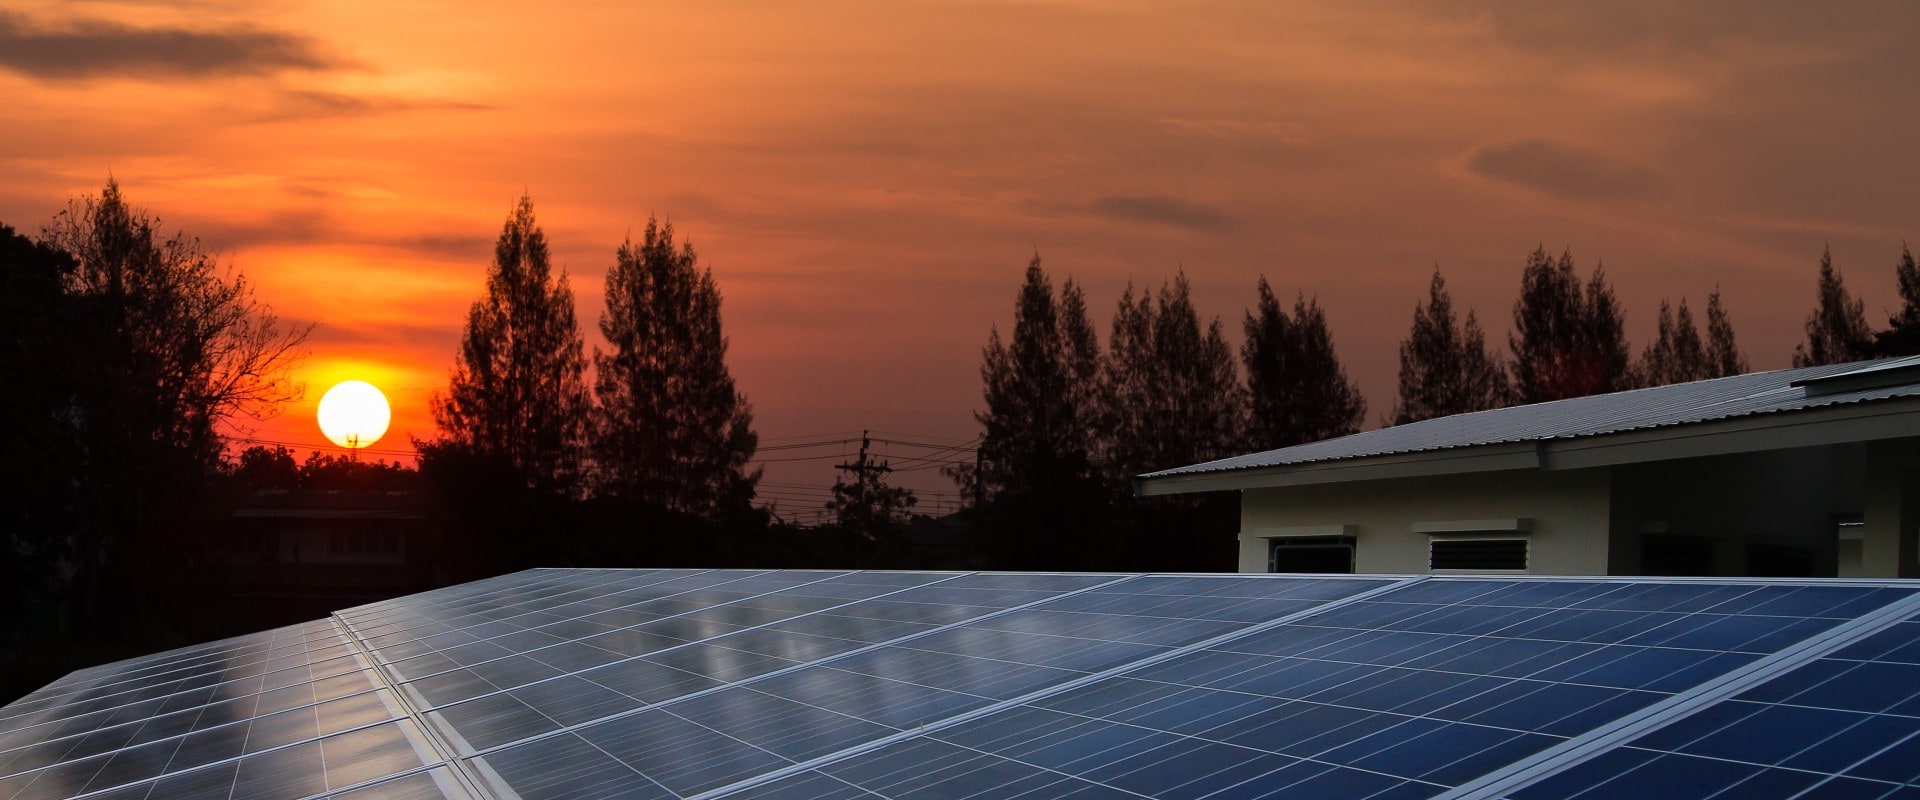 What are 3 pros and 3 cons of solar energy?